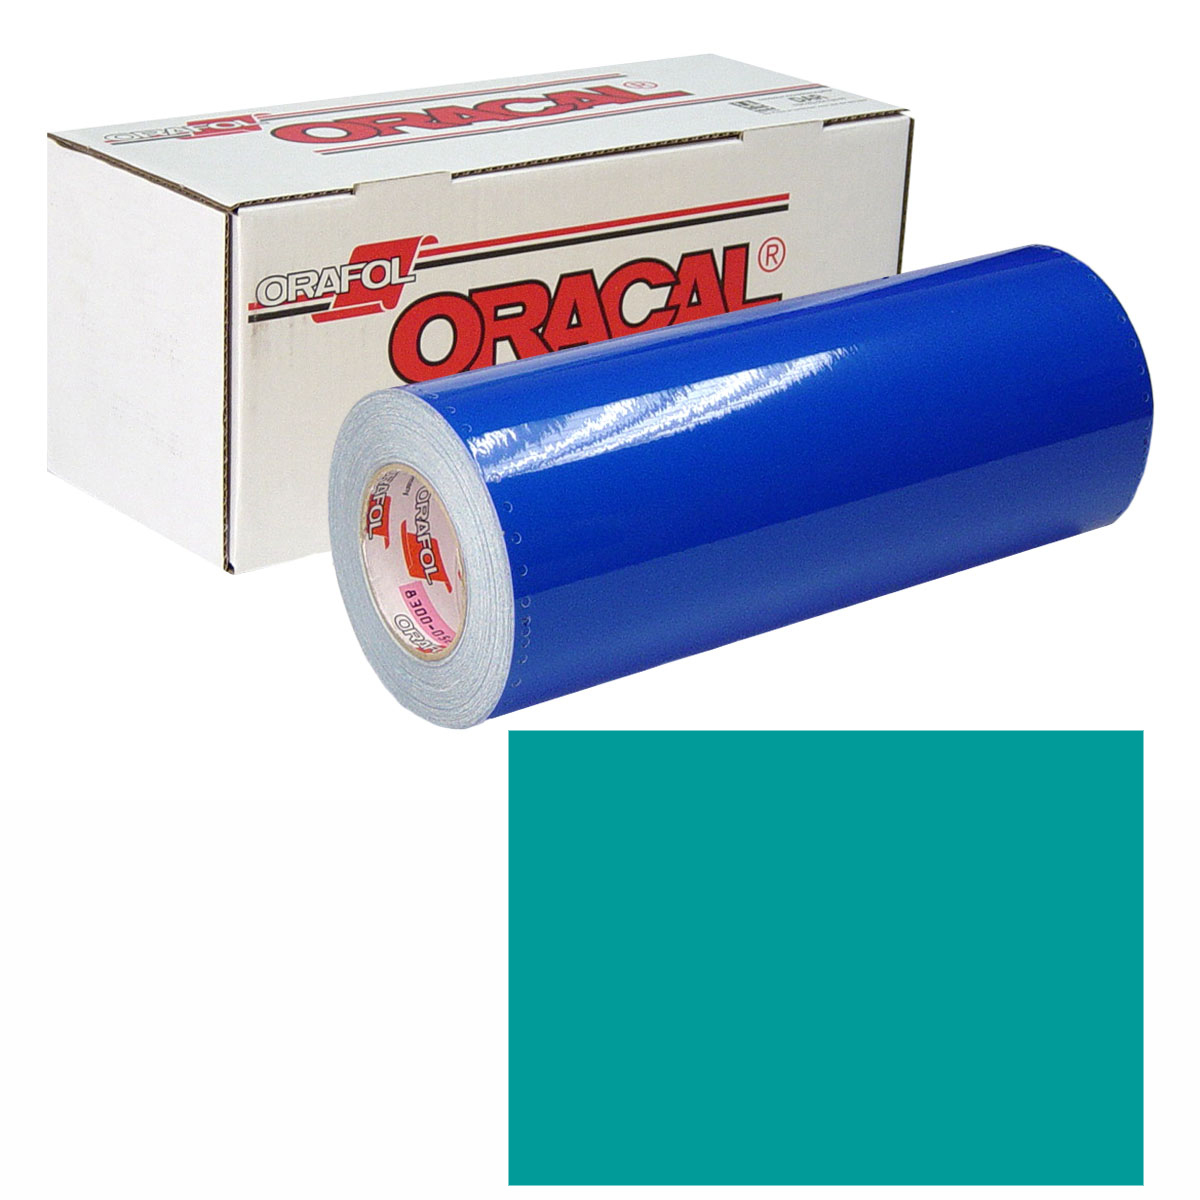 ORACAL 631 Unp 24in X 50yd 054 Turquoise